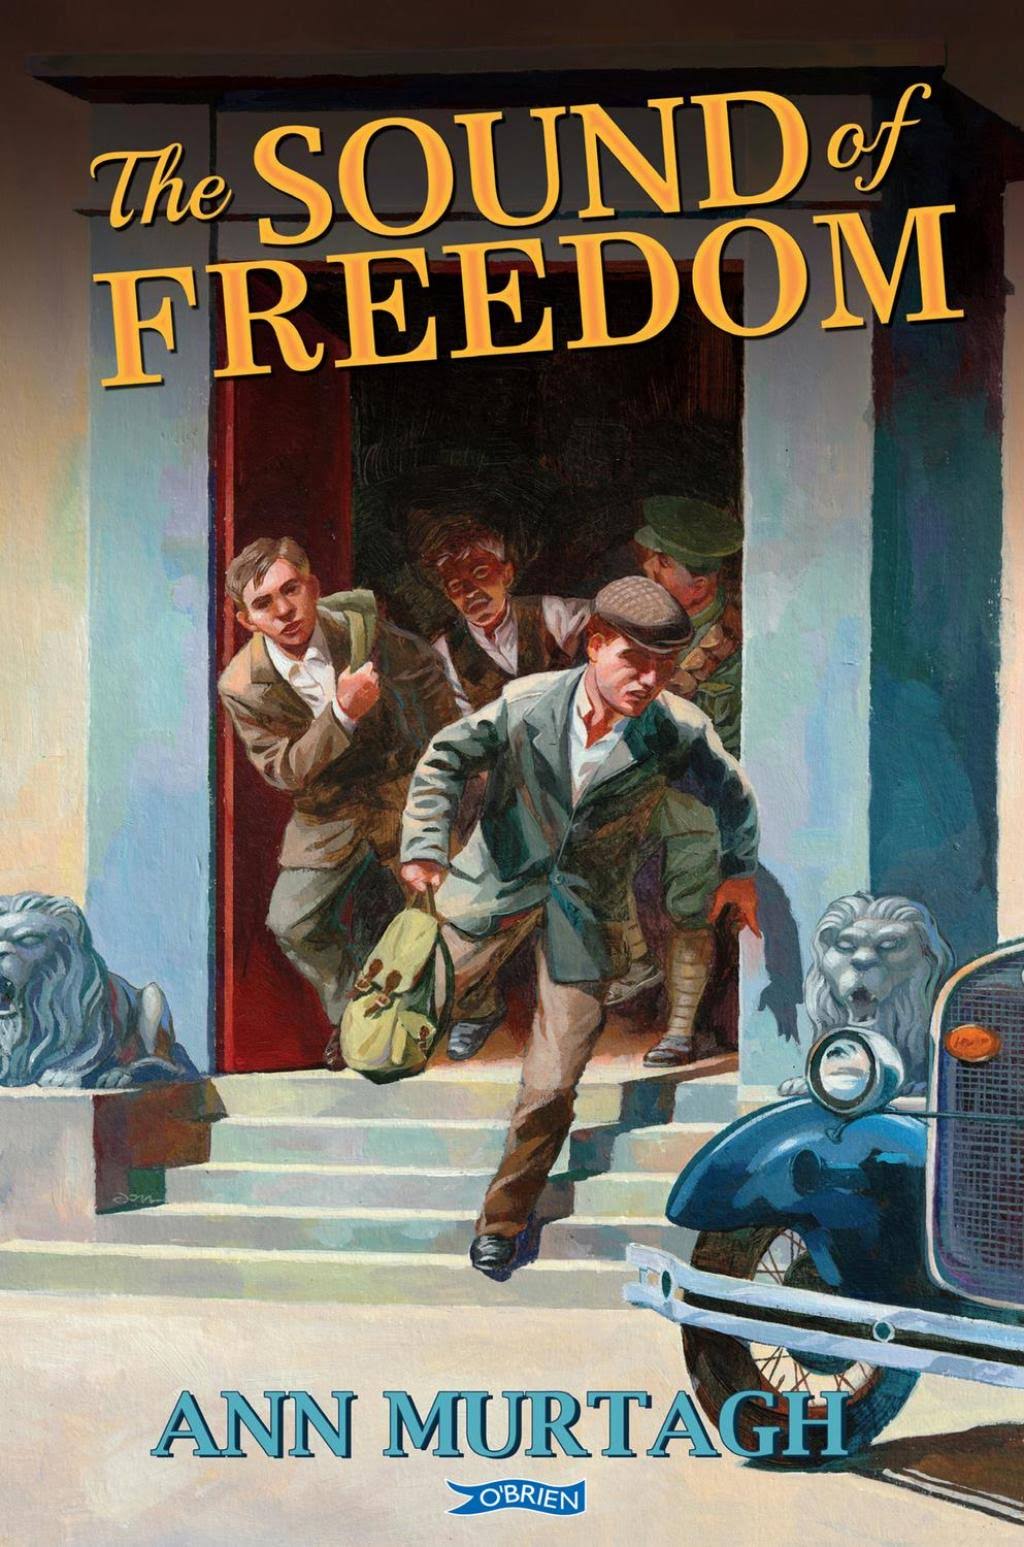 The Sound of Freedom by Ann Murtagh